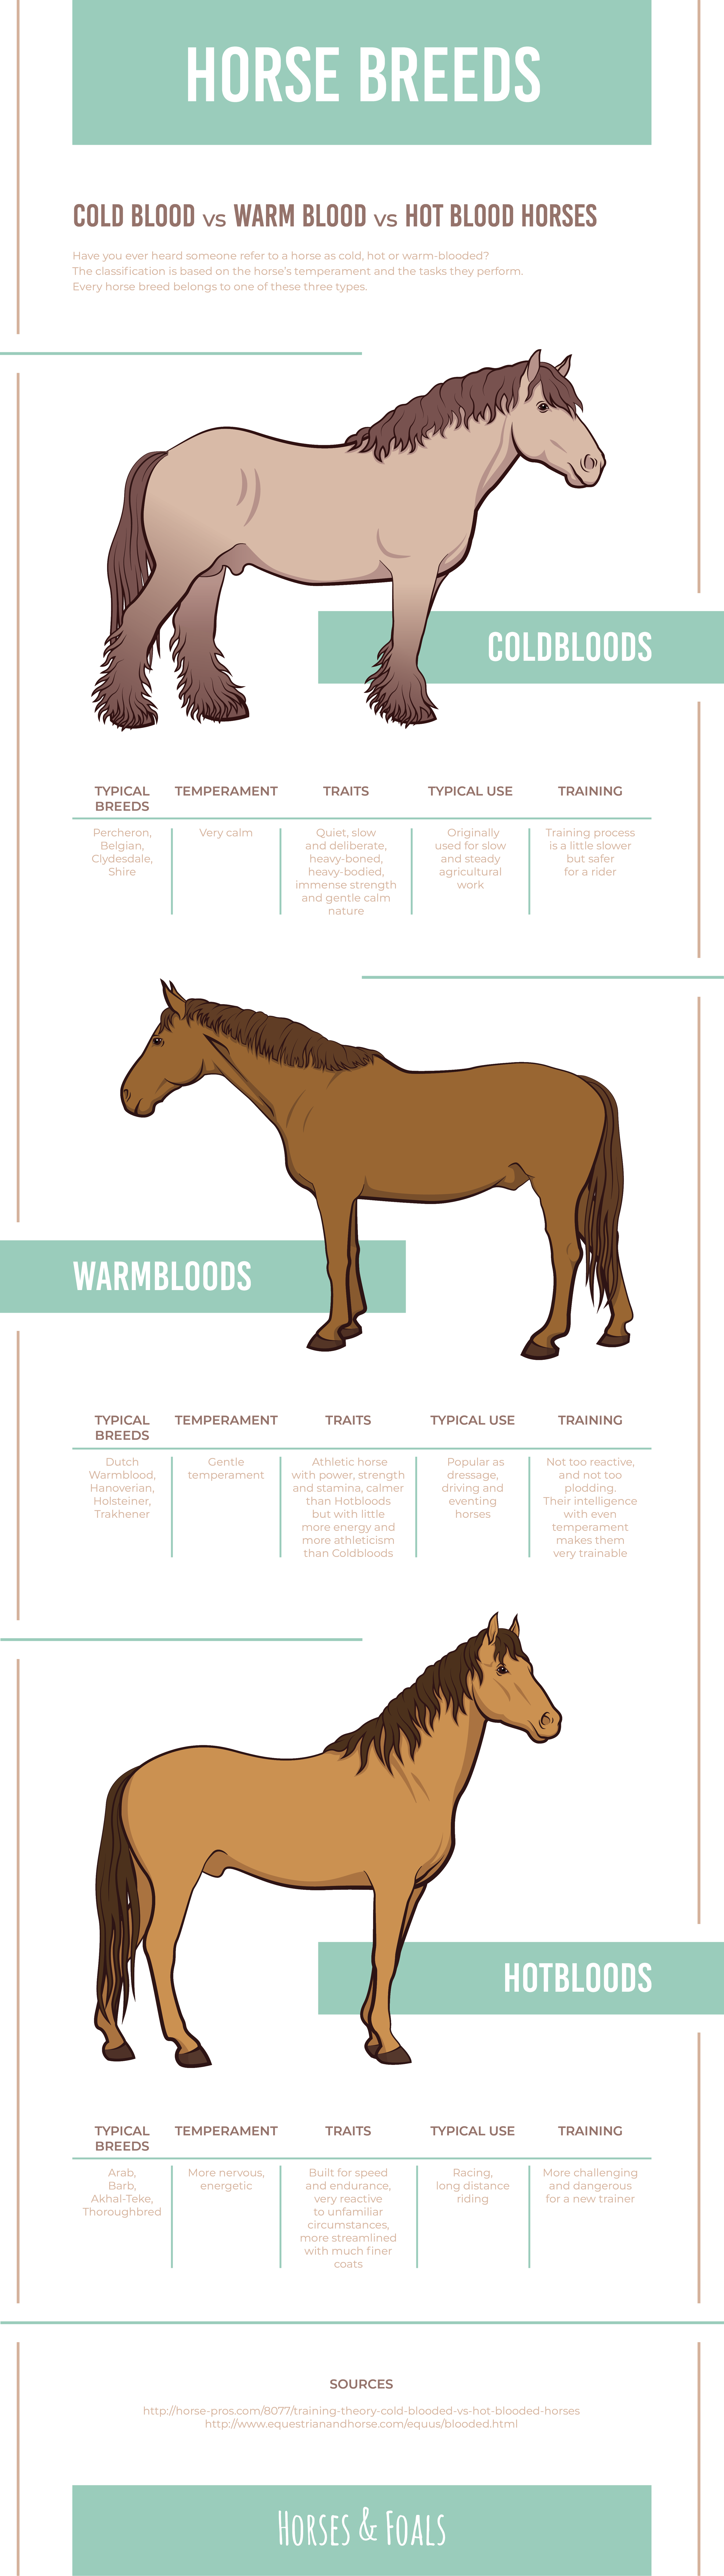 Hot, Warm And Cold Blooded Horses: What's The Difference?